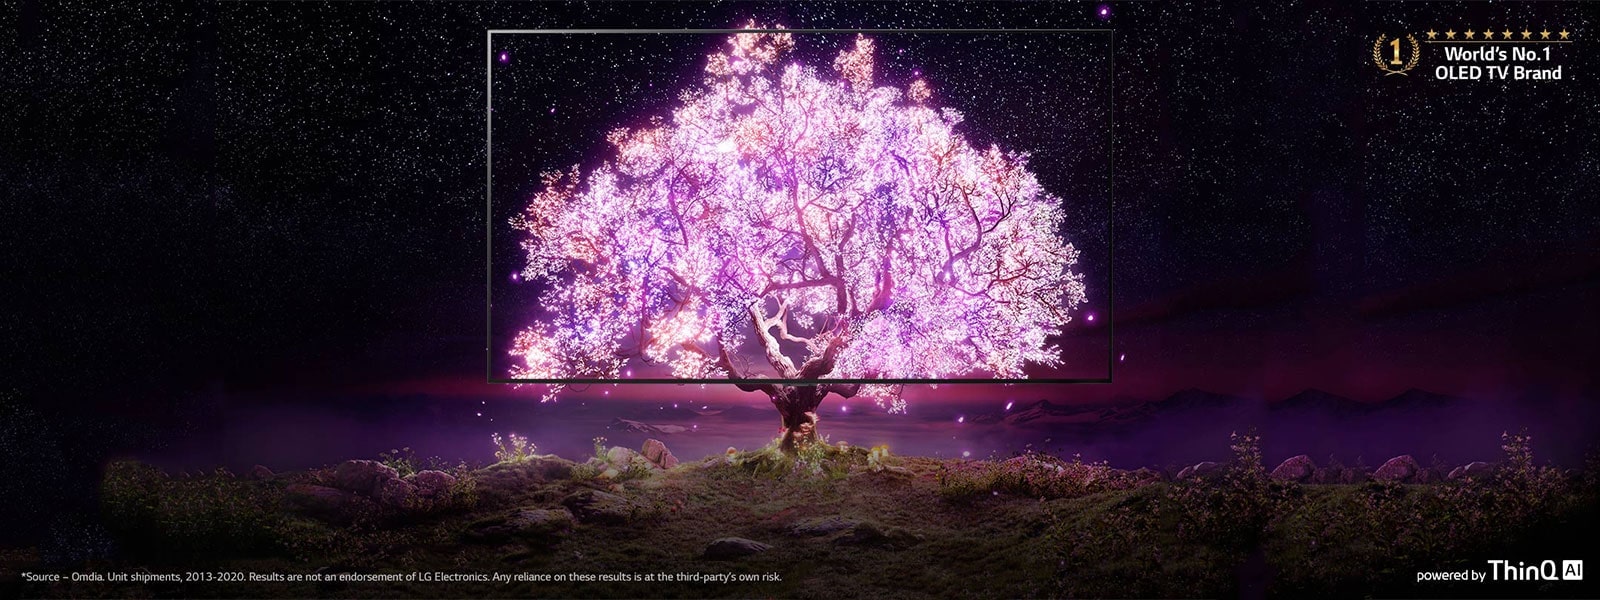 The scene where the OLED TV frame is overlapped with the image showing a tree shining in pink. The 'World's No.1 OLED TV Brand' logo was placed on the upper right. The 'powered by ThinQ AI' logo was placed at the bottom right. 'LG OLED evo' logo was placed on the upper left corner. There is a FIND OUT MORE button at the bottom center.